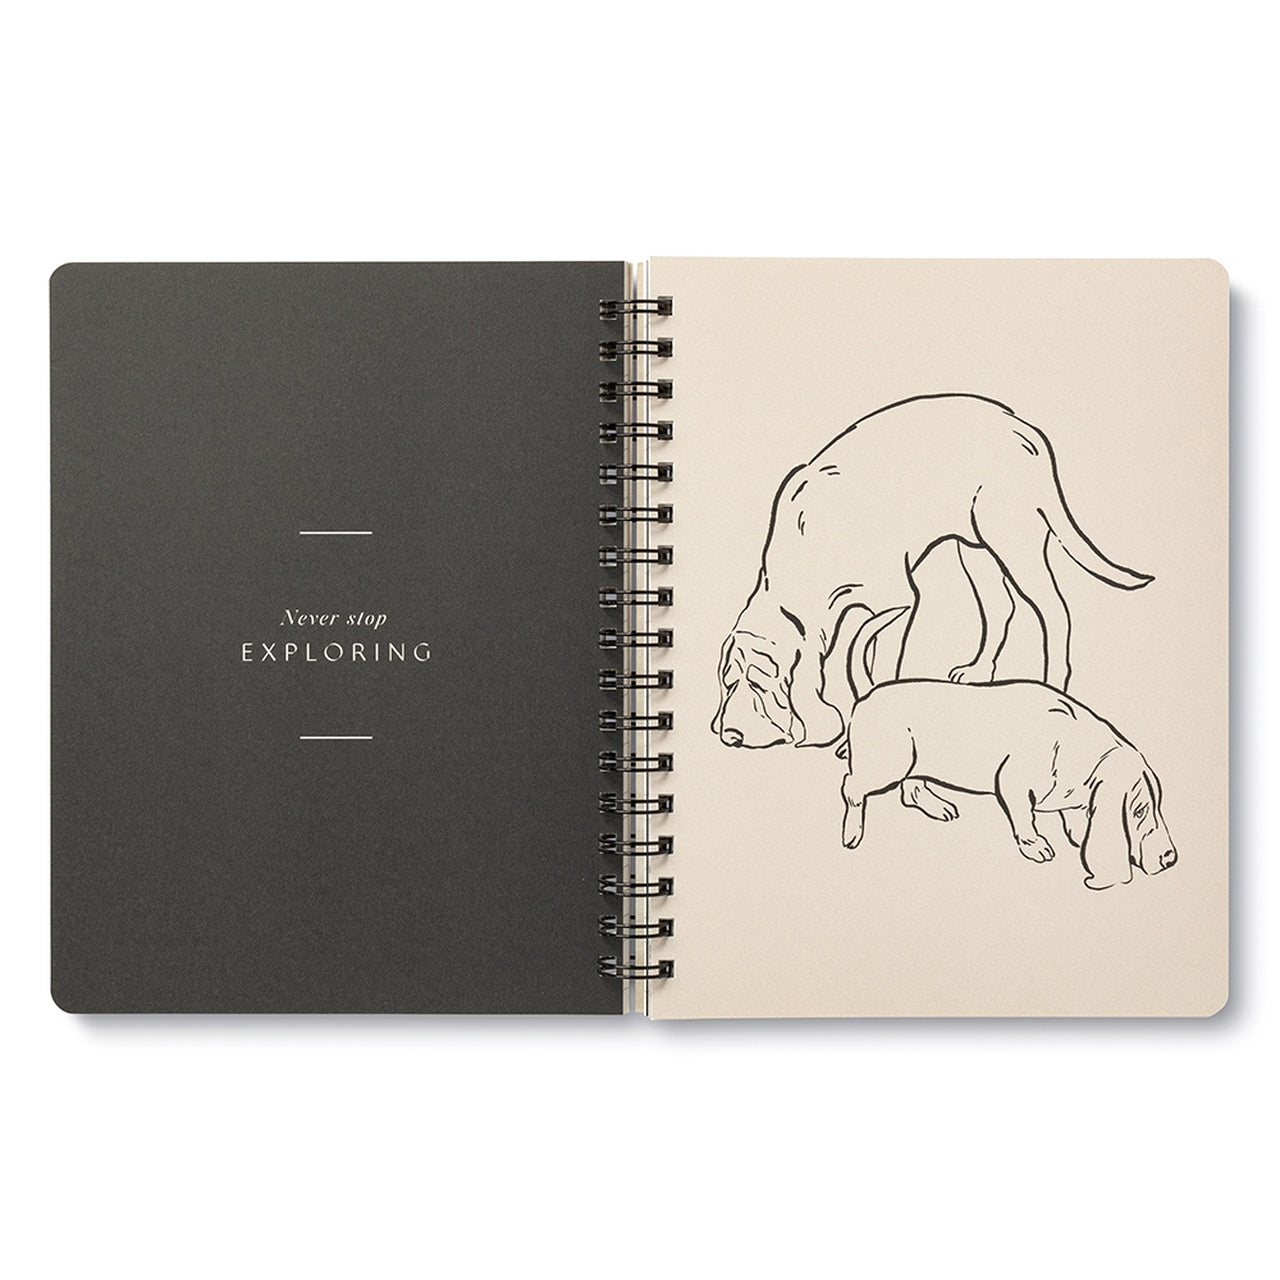 Dog Notebook Play All Day